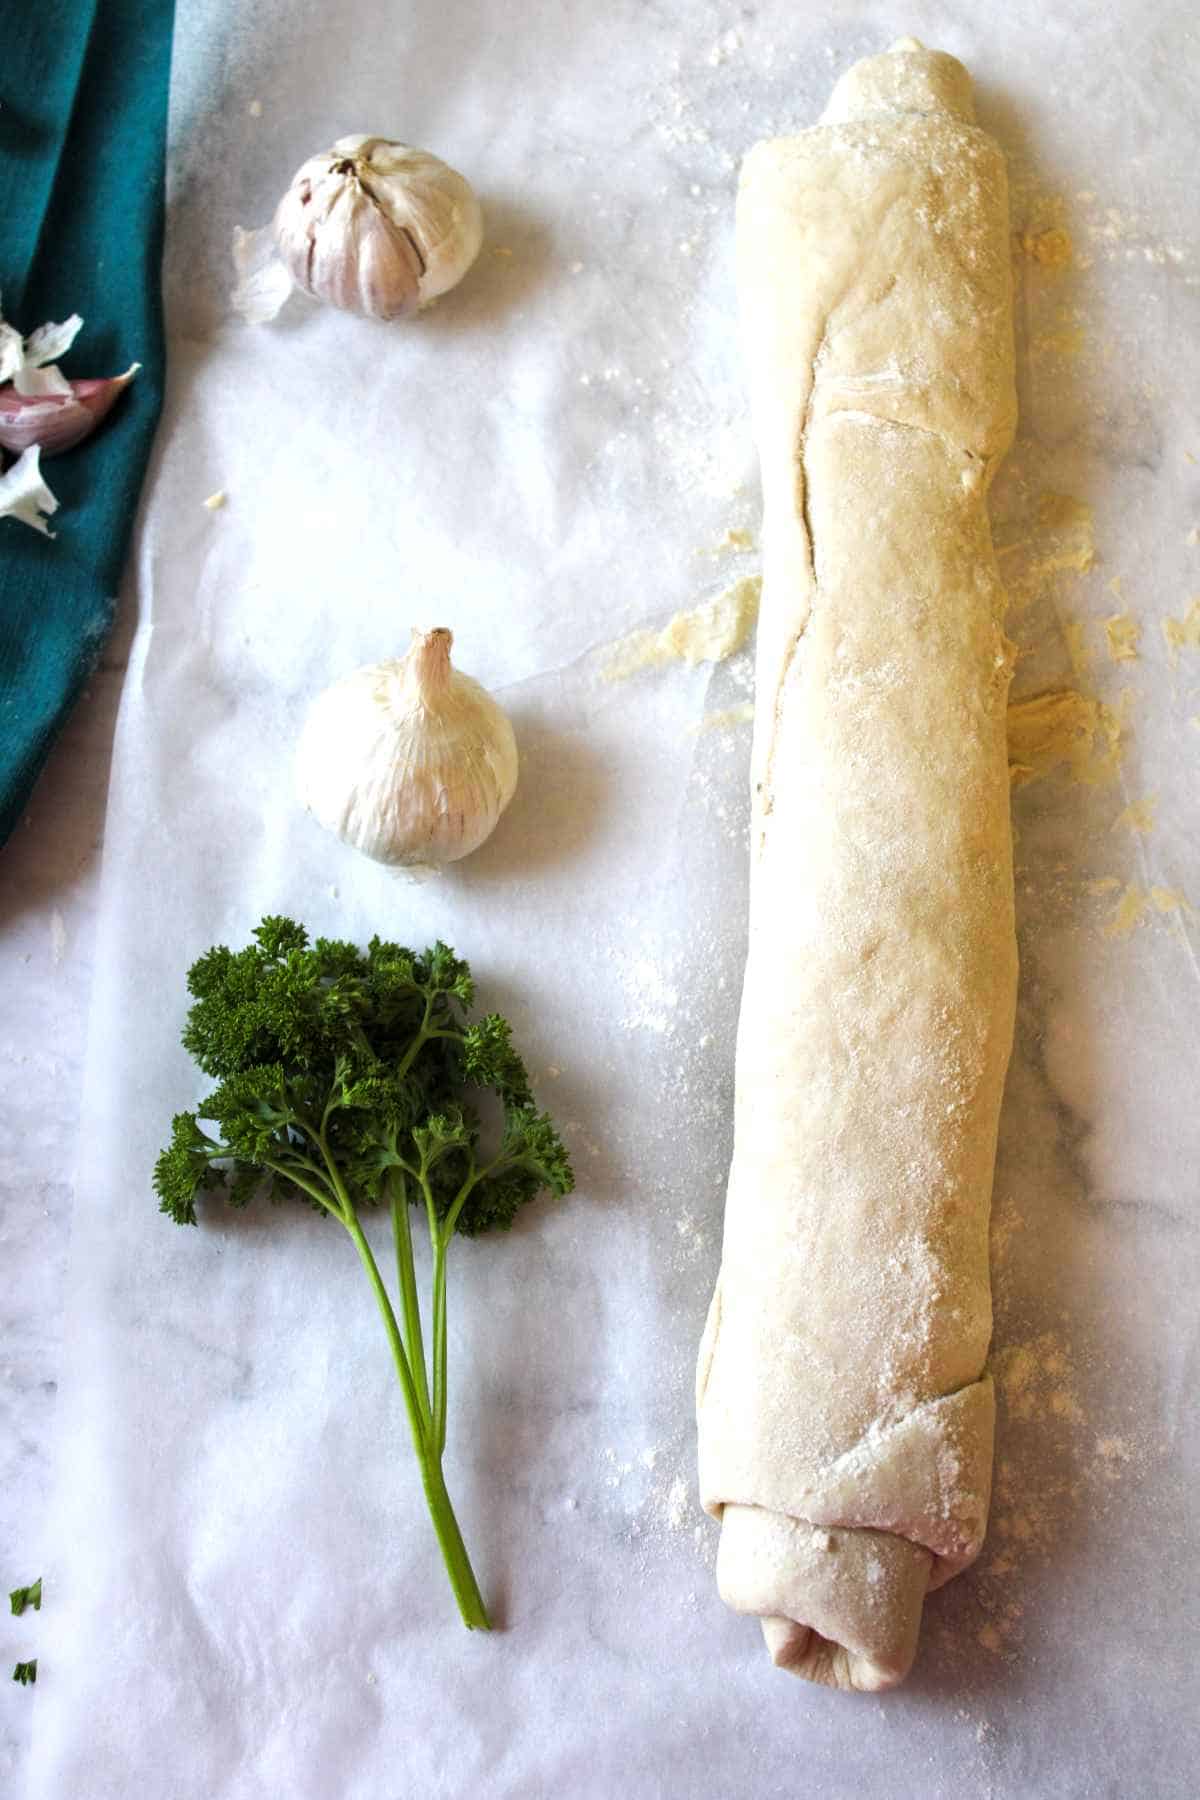 buttered dough rolled up.